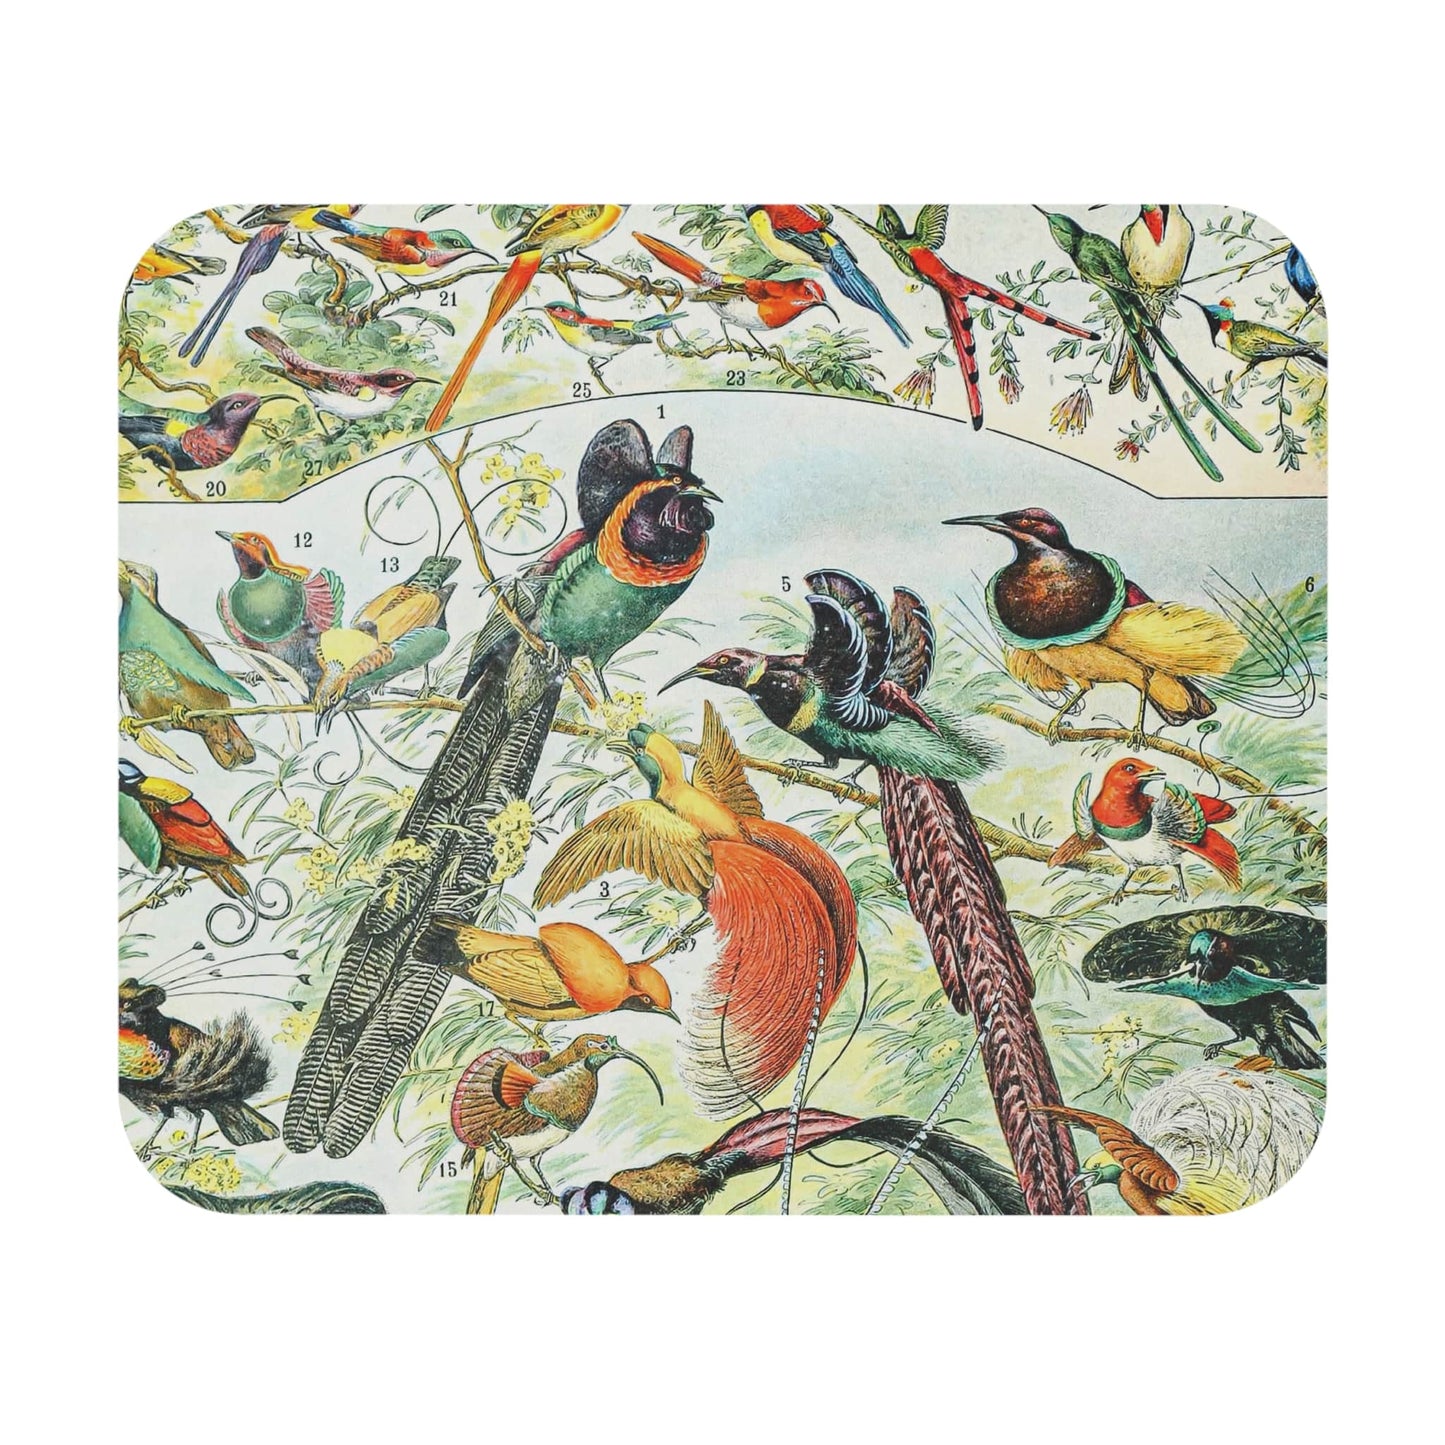 Collection of Birds Mouse Pad showcasing a tropical bird chart design, adding vibrancy to desk and office decor.